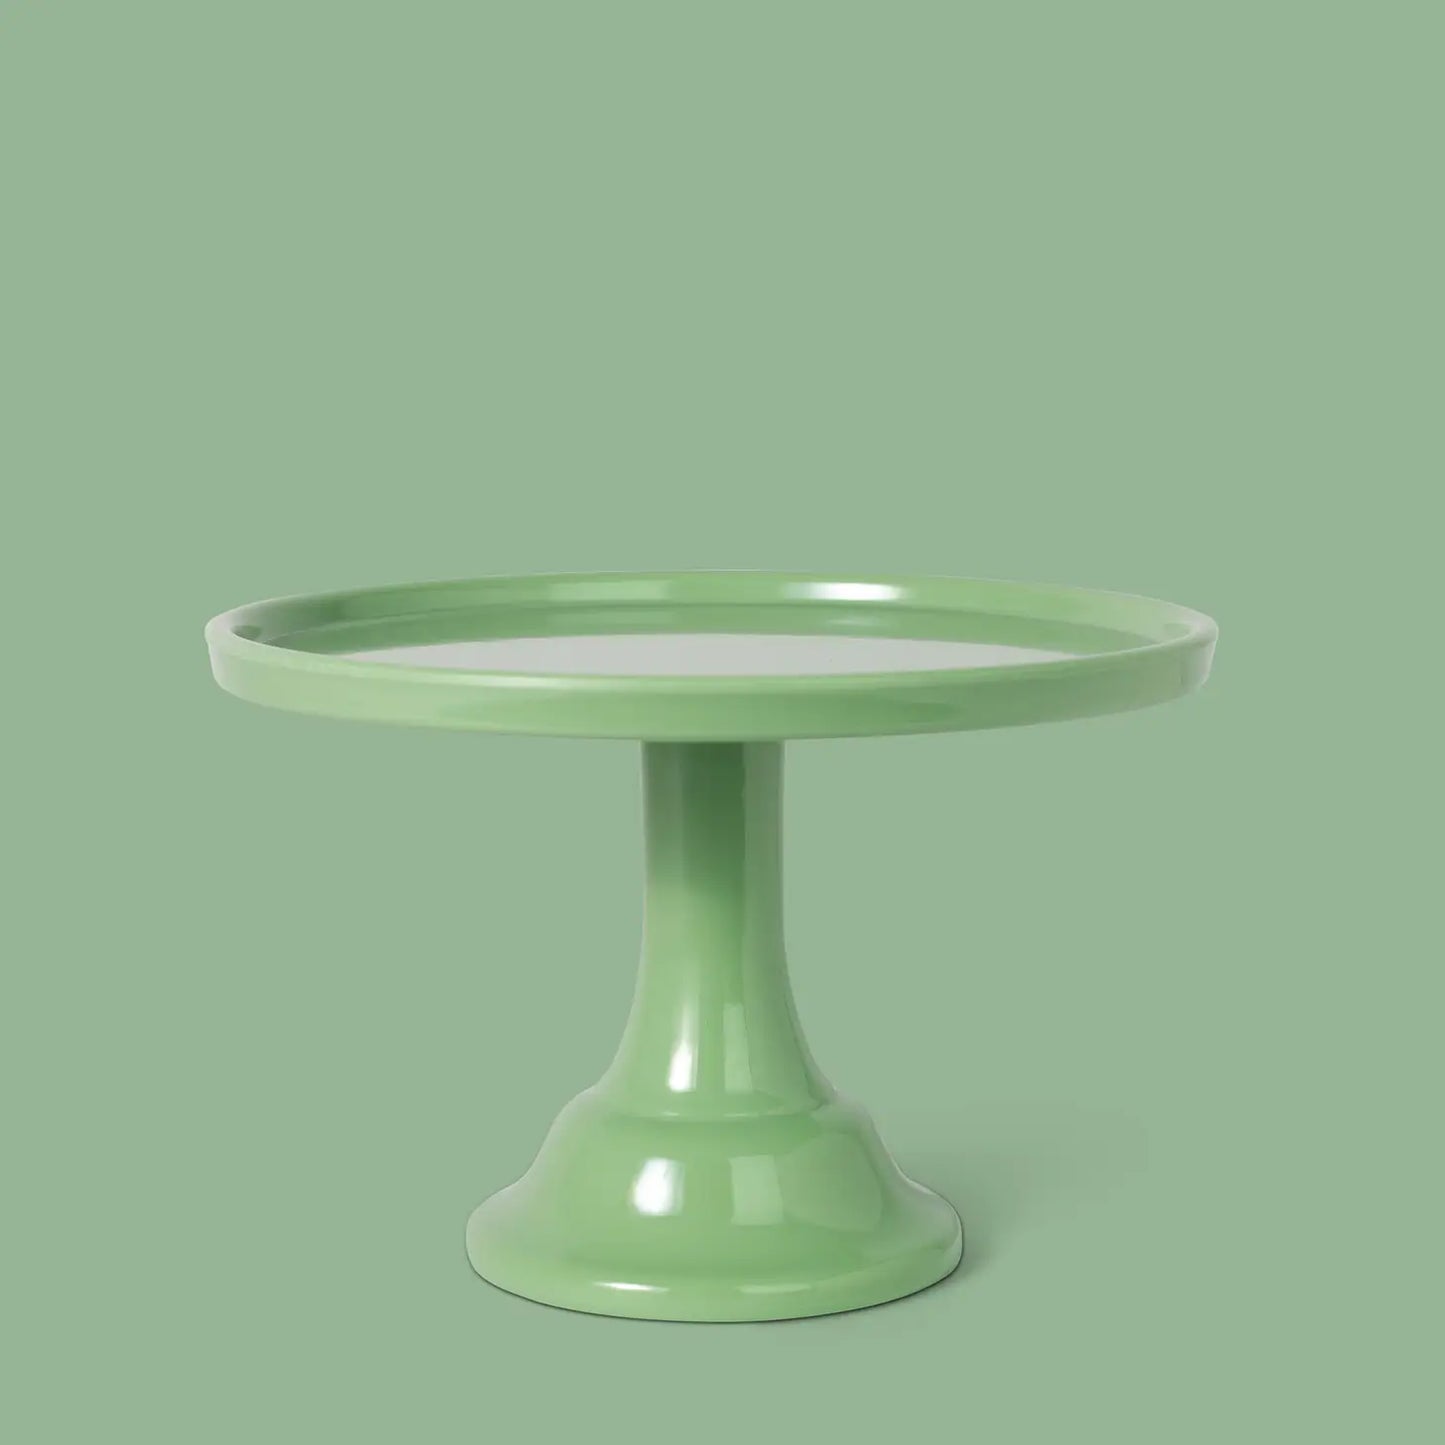 Melamine Bespoke Cake Stand Small - Sage PRE ORDER ONLY Late June Arrival